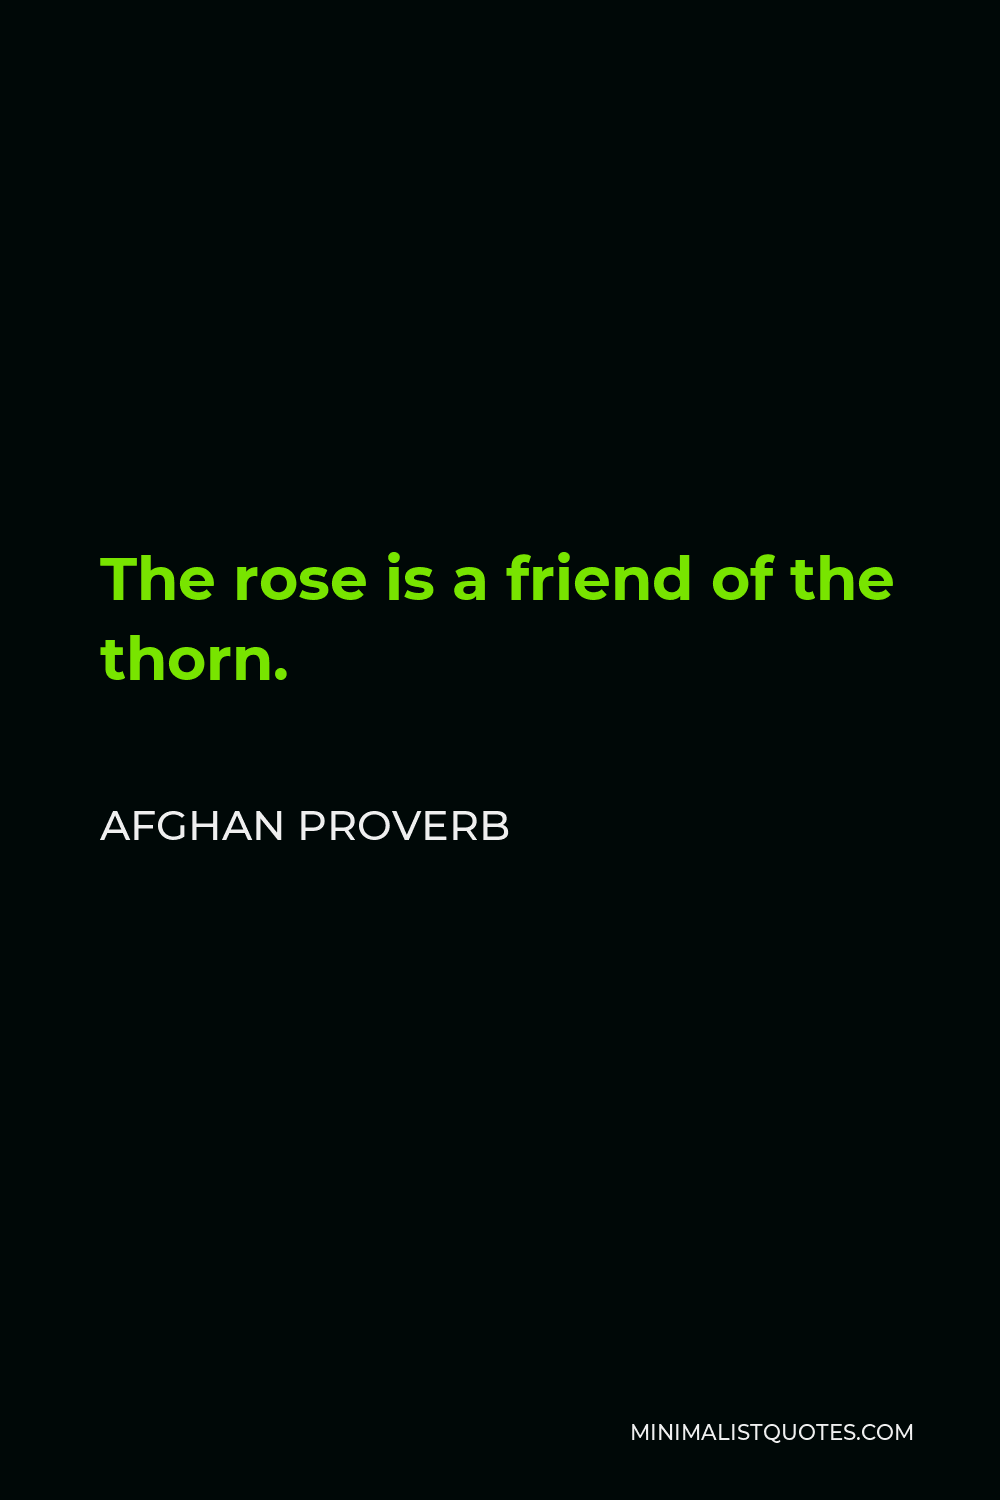 Afghan Proverb Quote - The rose is a friend of the thorn.